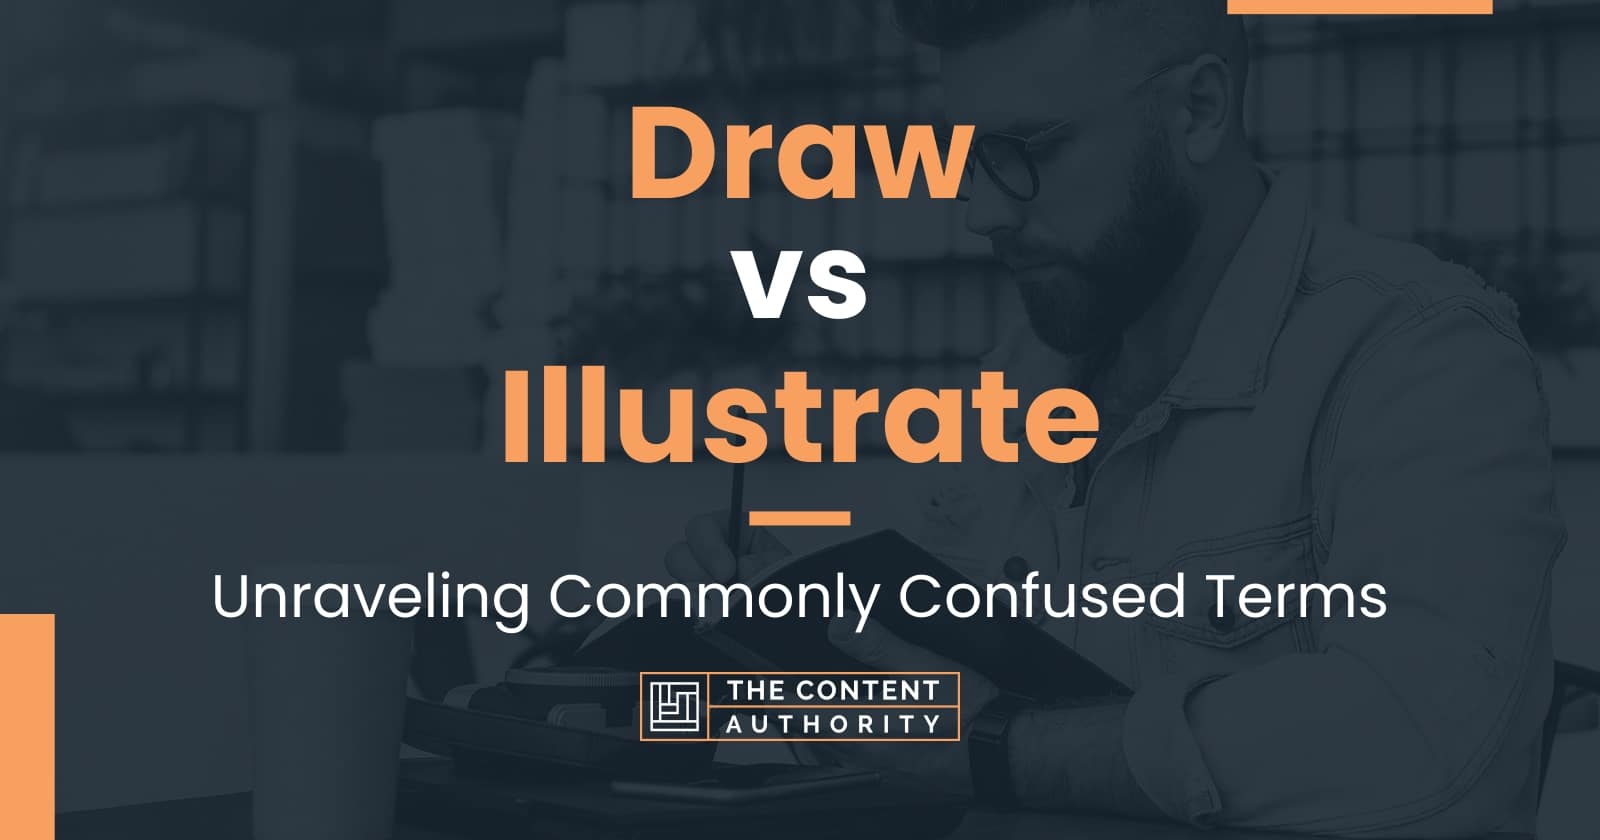 Draw vs Illustrate Unraveling Commonly Confused Terms